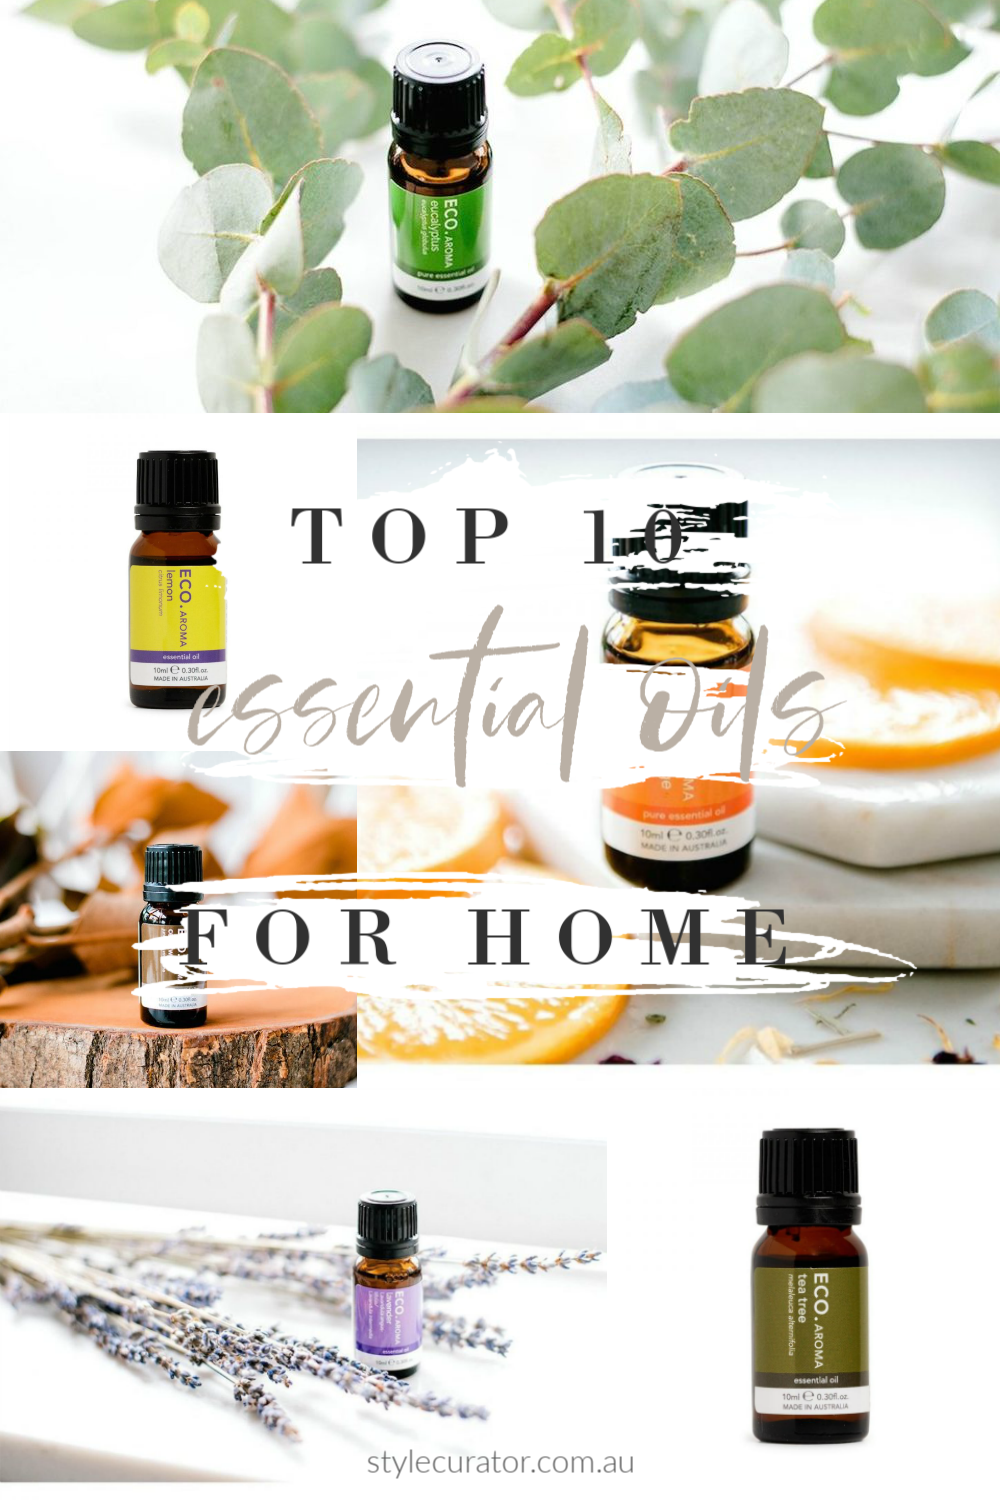 Top 10 essential oils for the home